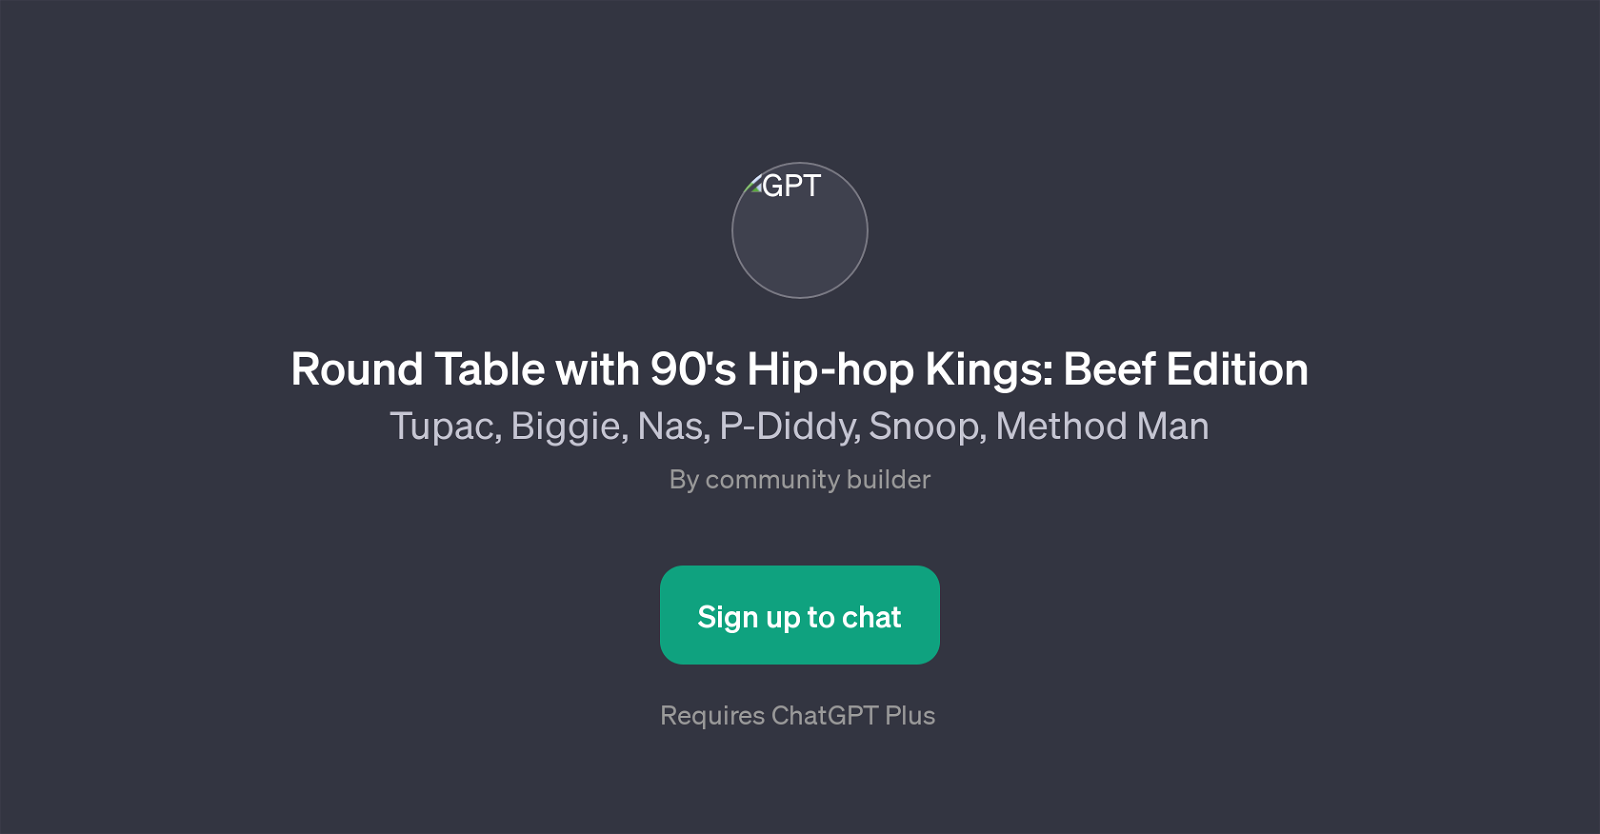 Round Table with 90's Hip-hop Kings: Beef Edition website